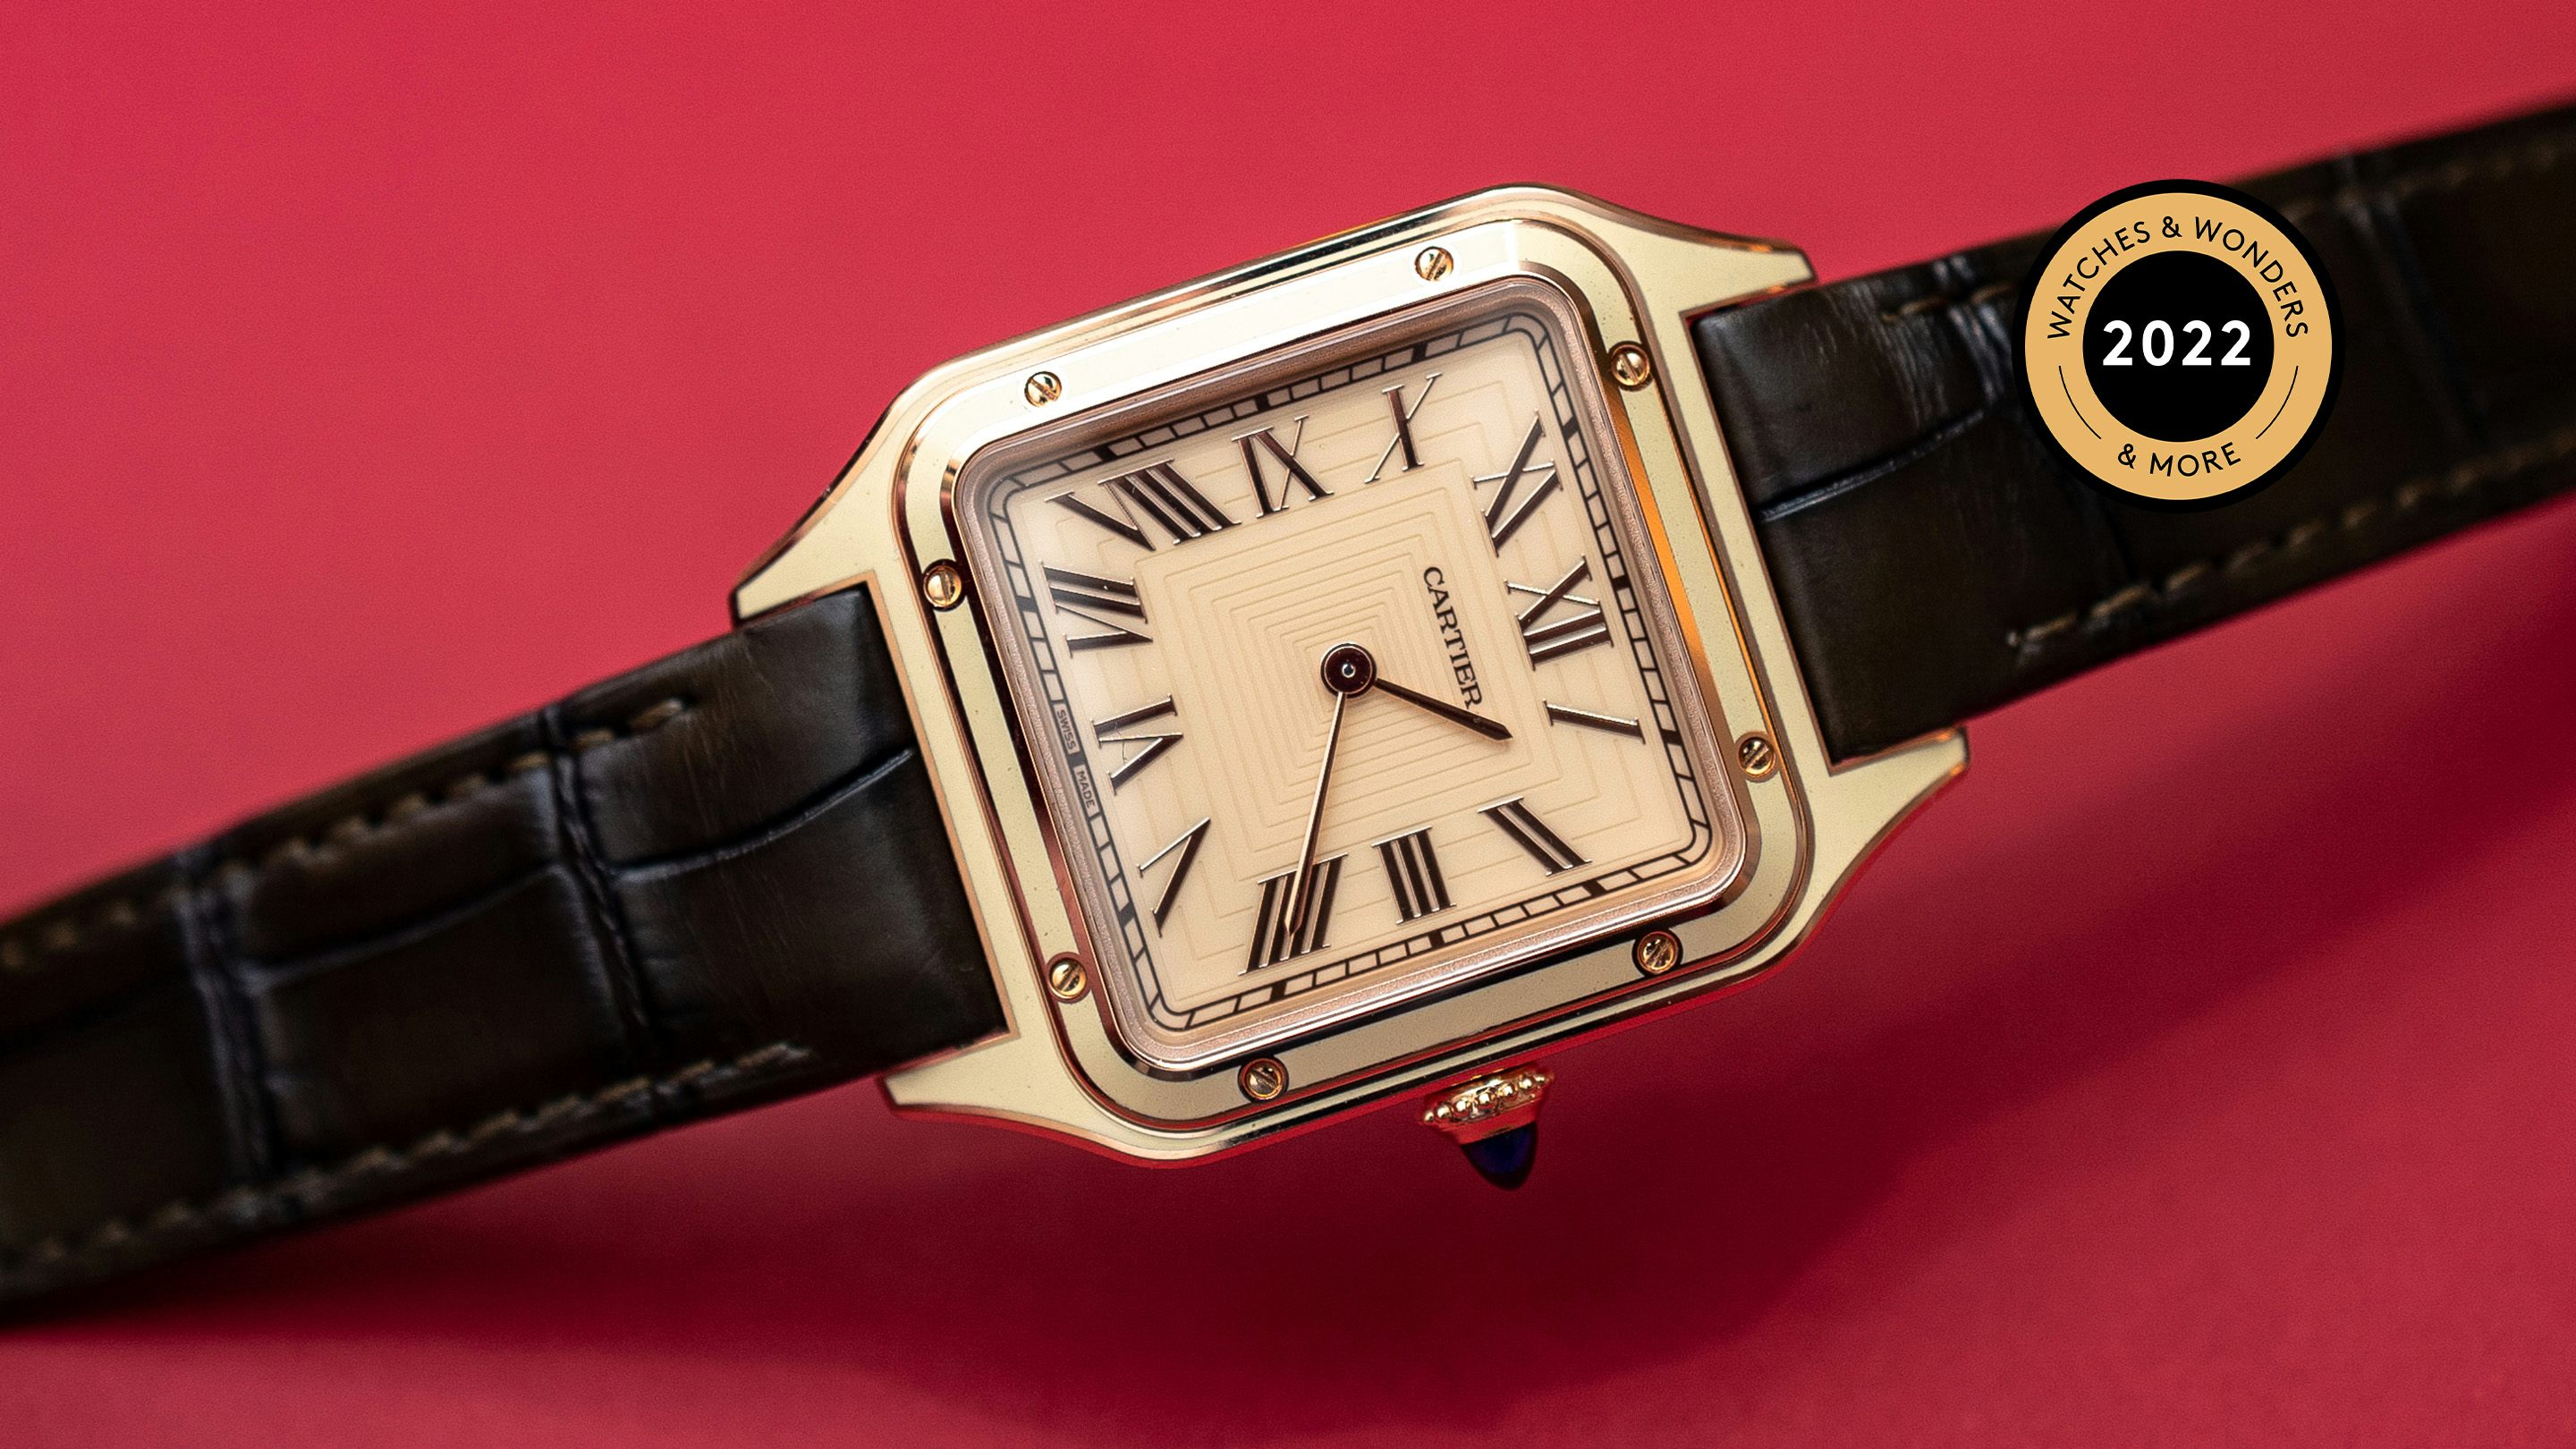 radiator Take out Inward Cartier's Best New Watch Is The Santos Dumont